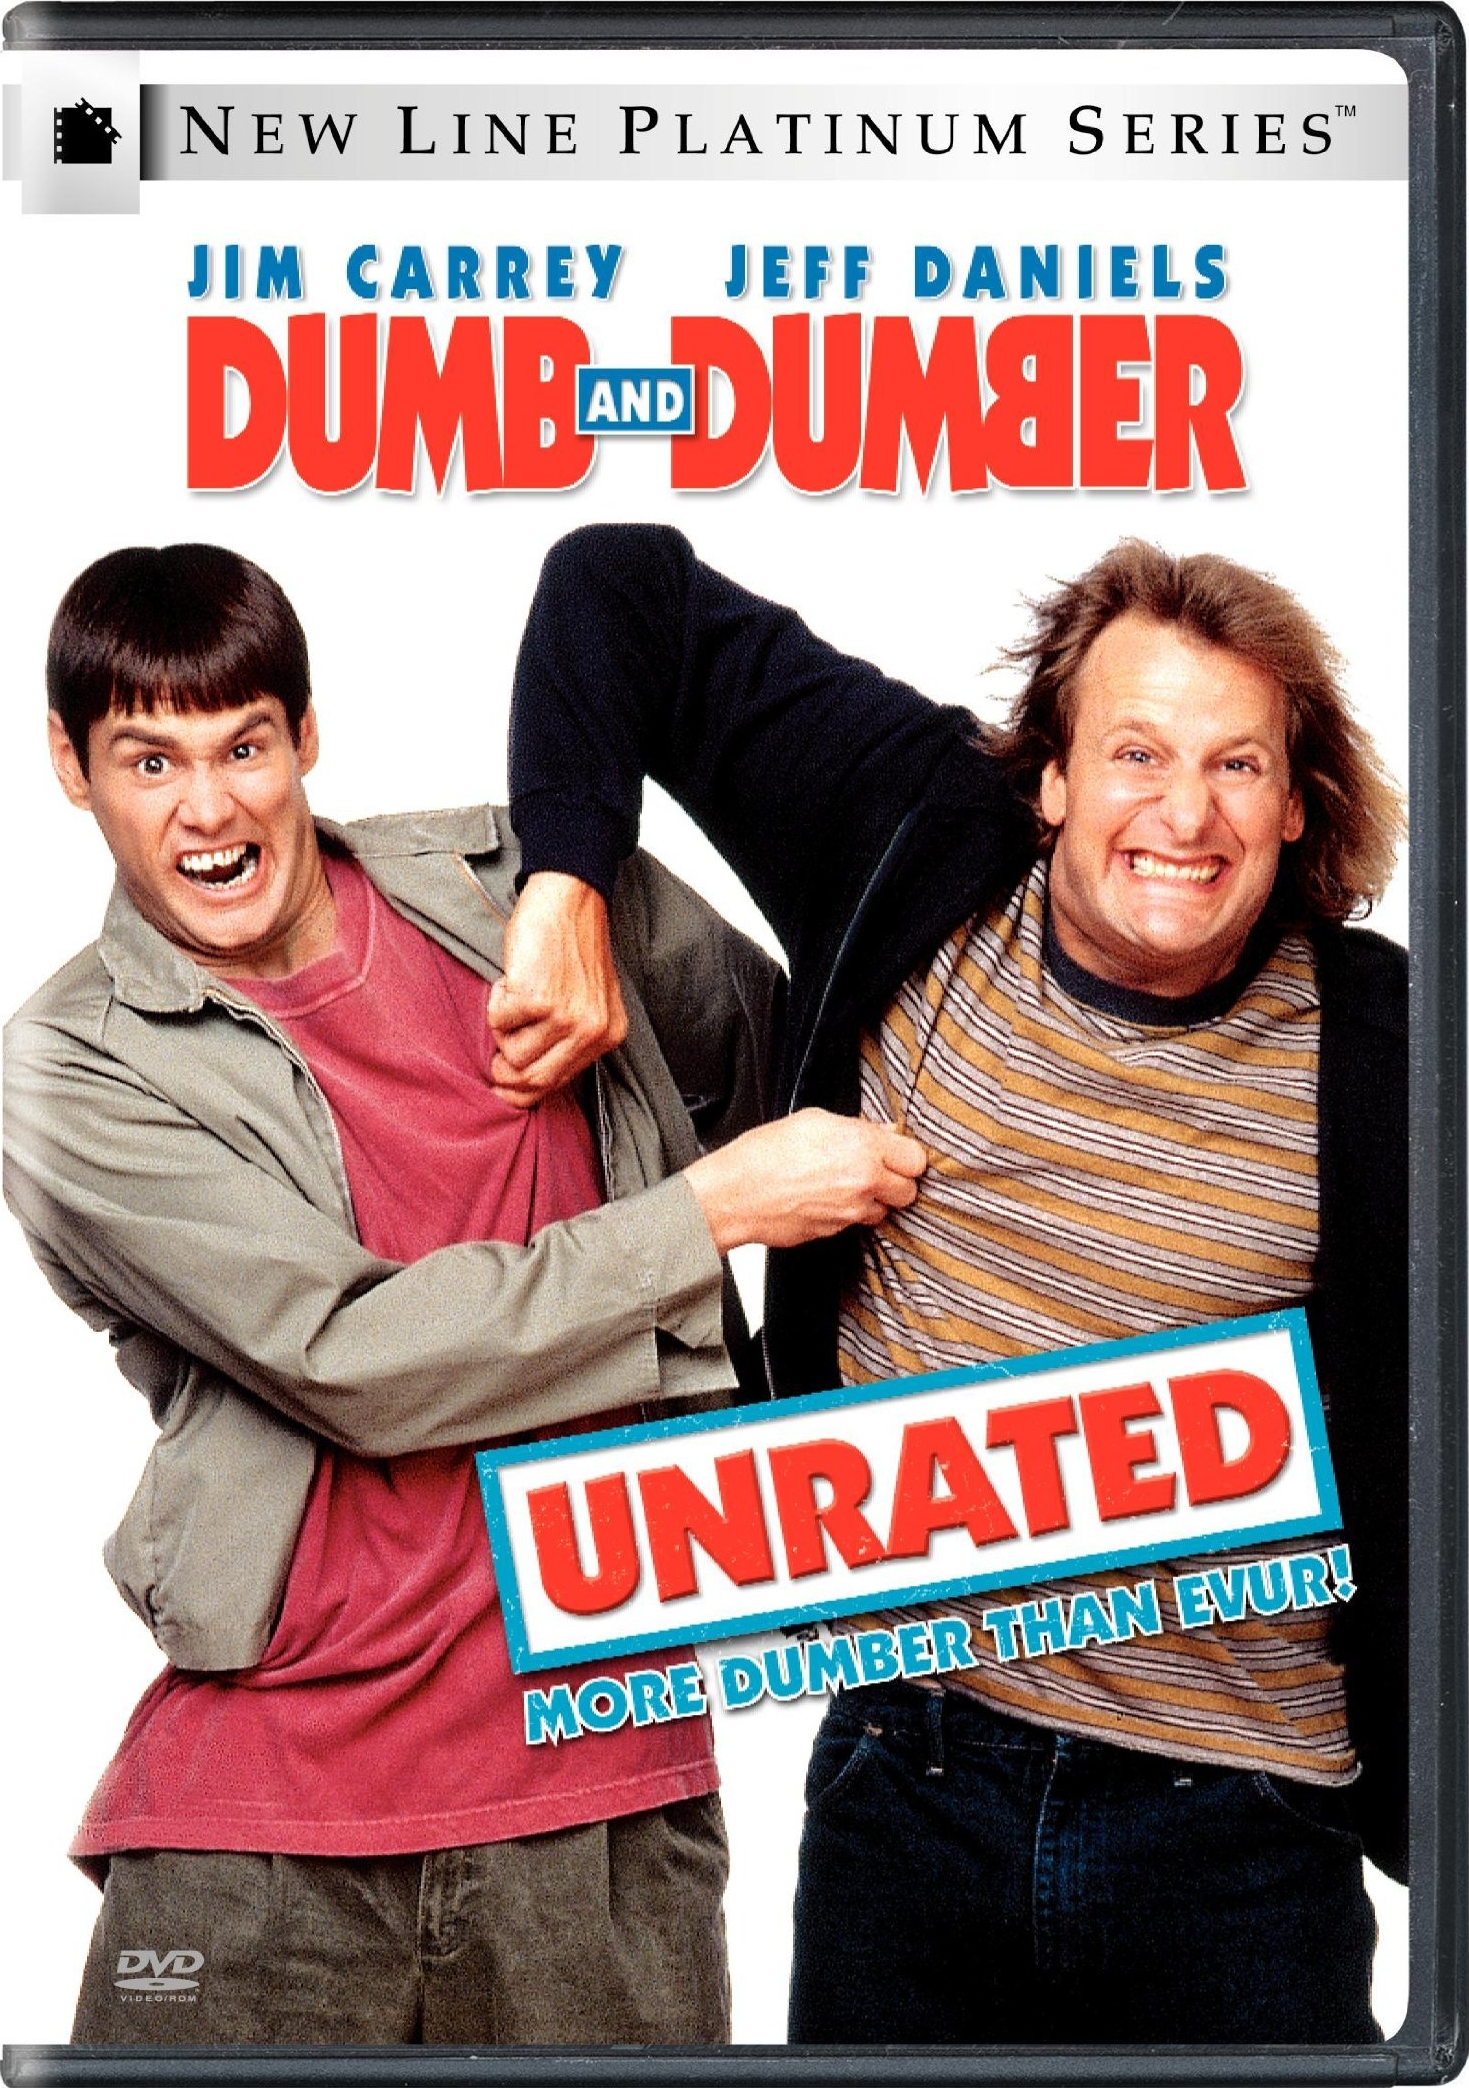 Dumb and Dumber: 3-Film Collection (1994-2014) [Theatrical and Unrated Versions] Una Pareja de Idiotas: Colección de 3 Películas (1994-2014) [Theatrical and Unrated Versions] [E-AC3/AC3 5.1/2.0 + SRT] [Prime Video] [HBO Max] [ClaroVideo] 4583_front